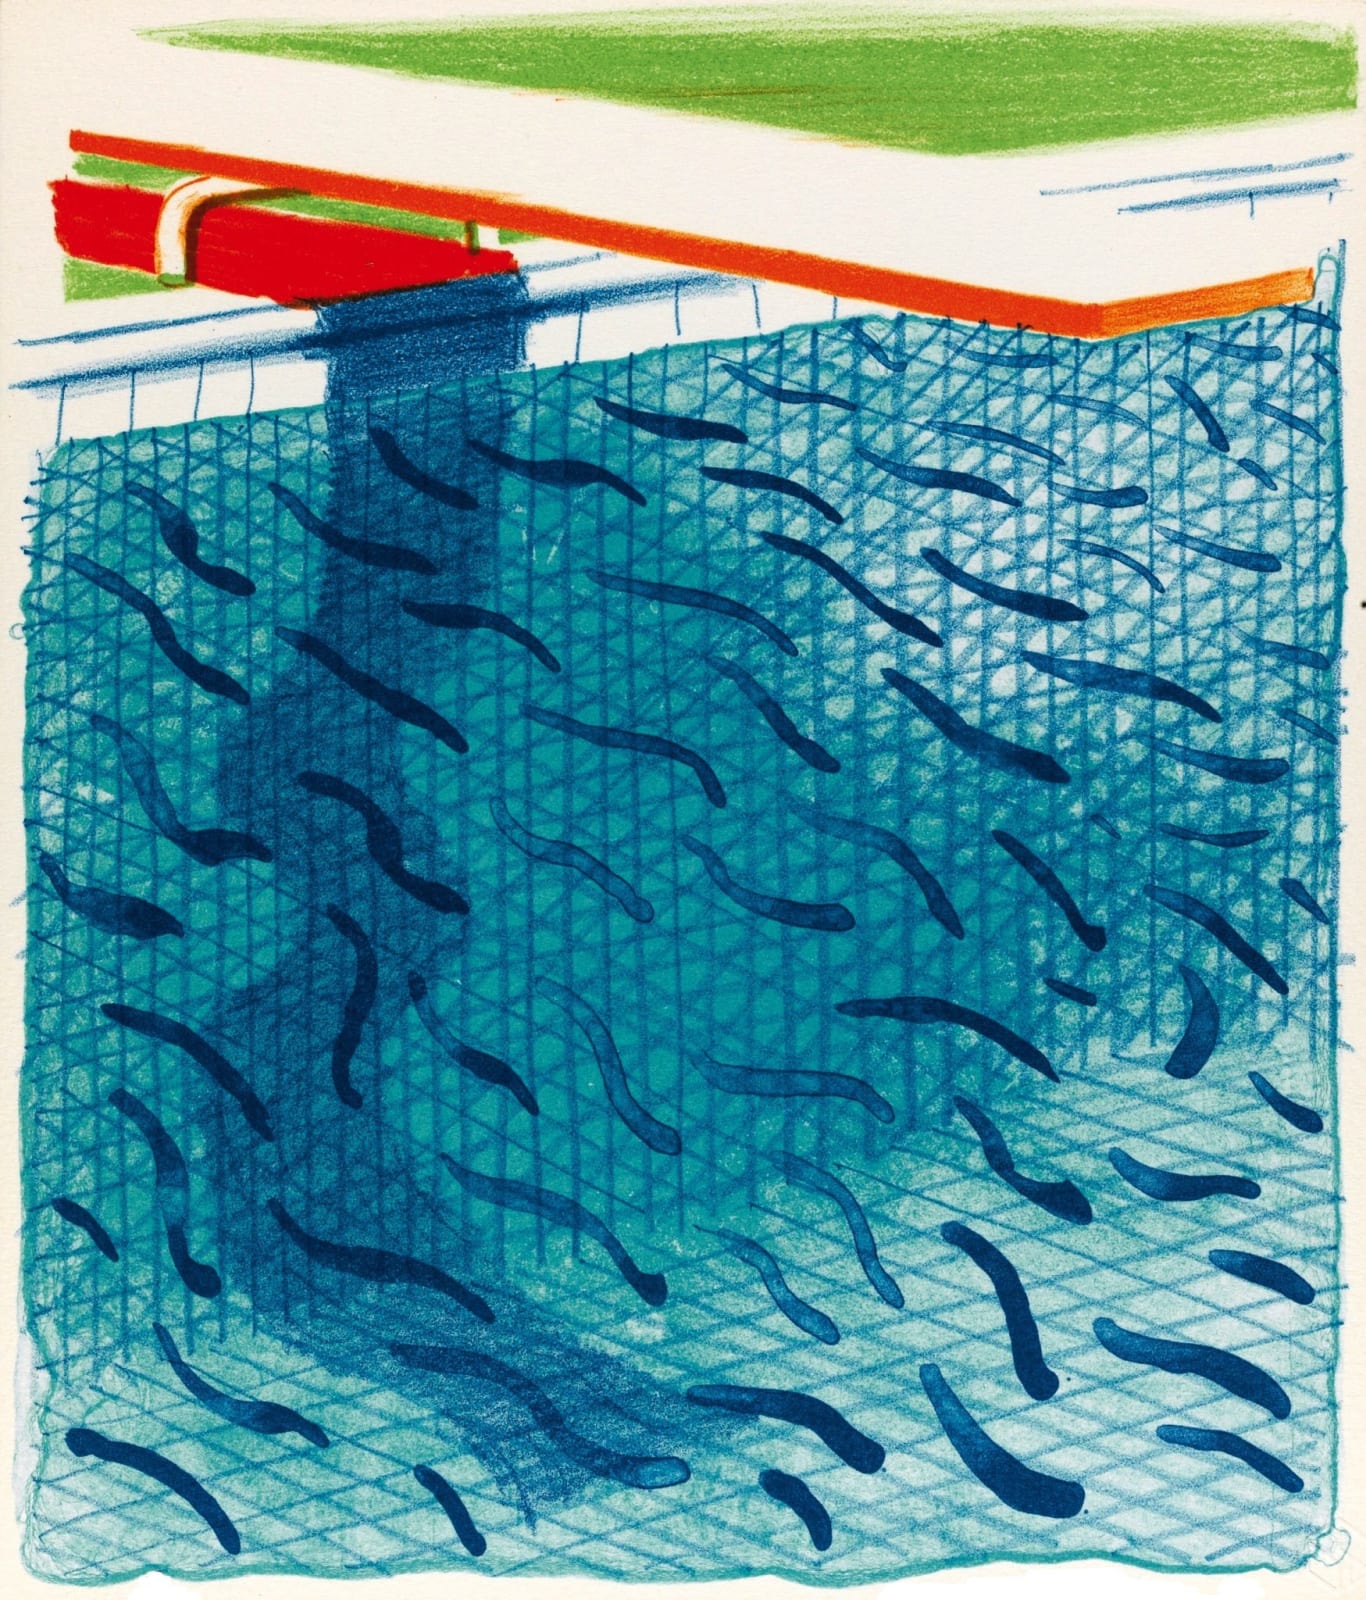 David Hockney, Pool Made with Paper and Blue Ink for Book From Paper Pools, 1980